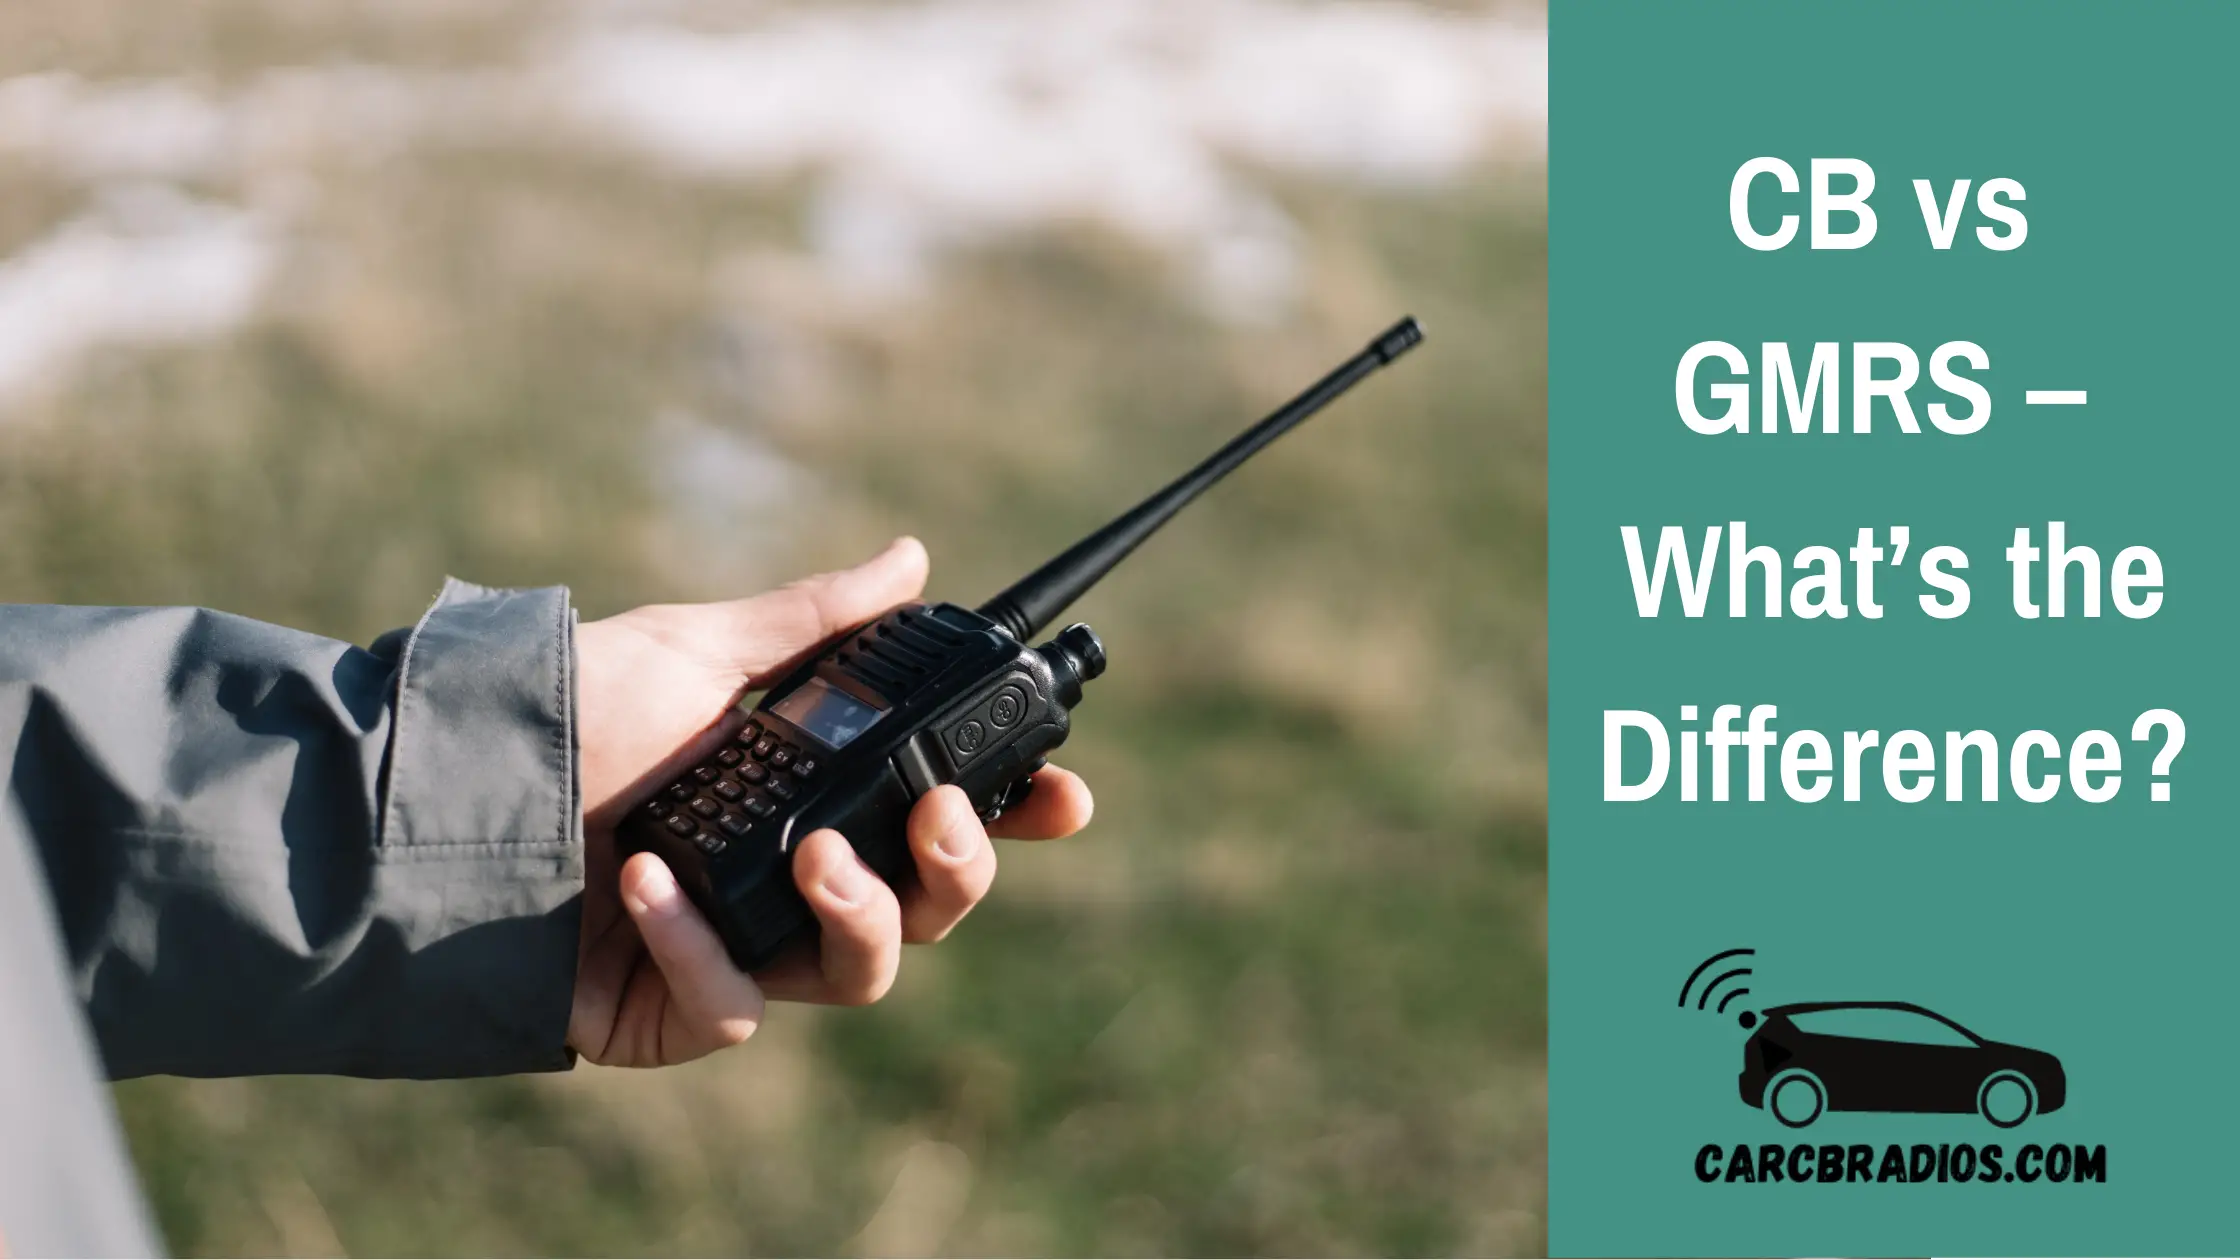 CB vs GMRS – GMRS and CB are virtually identical as far as how they operate on the air, the only difference is one must have a license and pay fees to the FCC in order for legal operation.